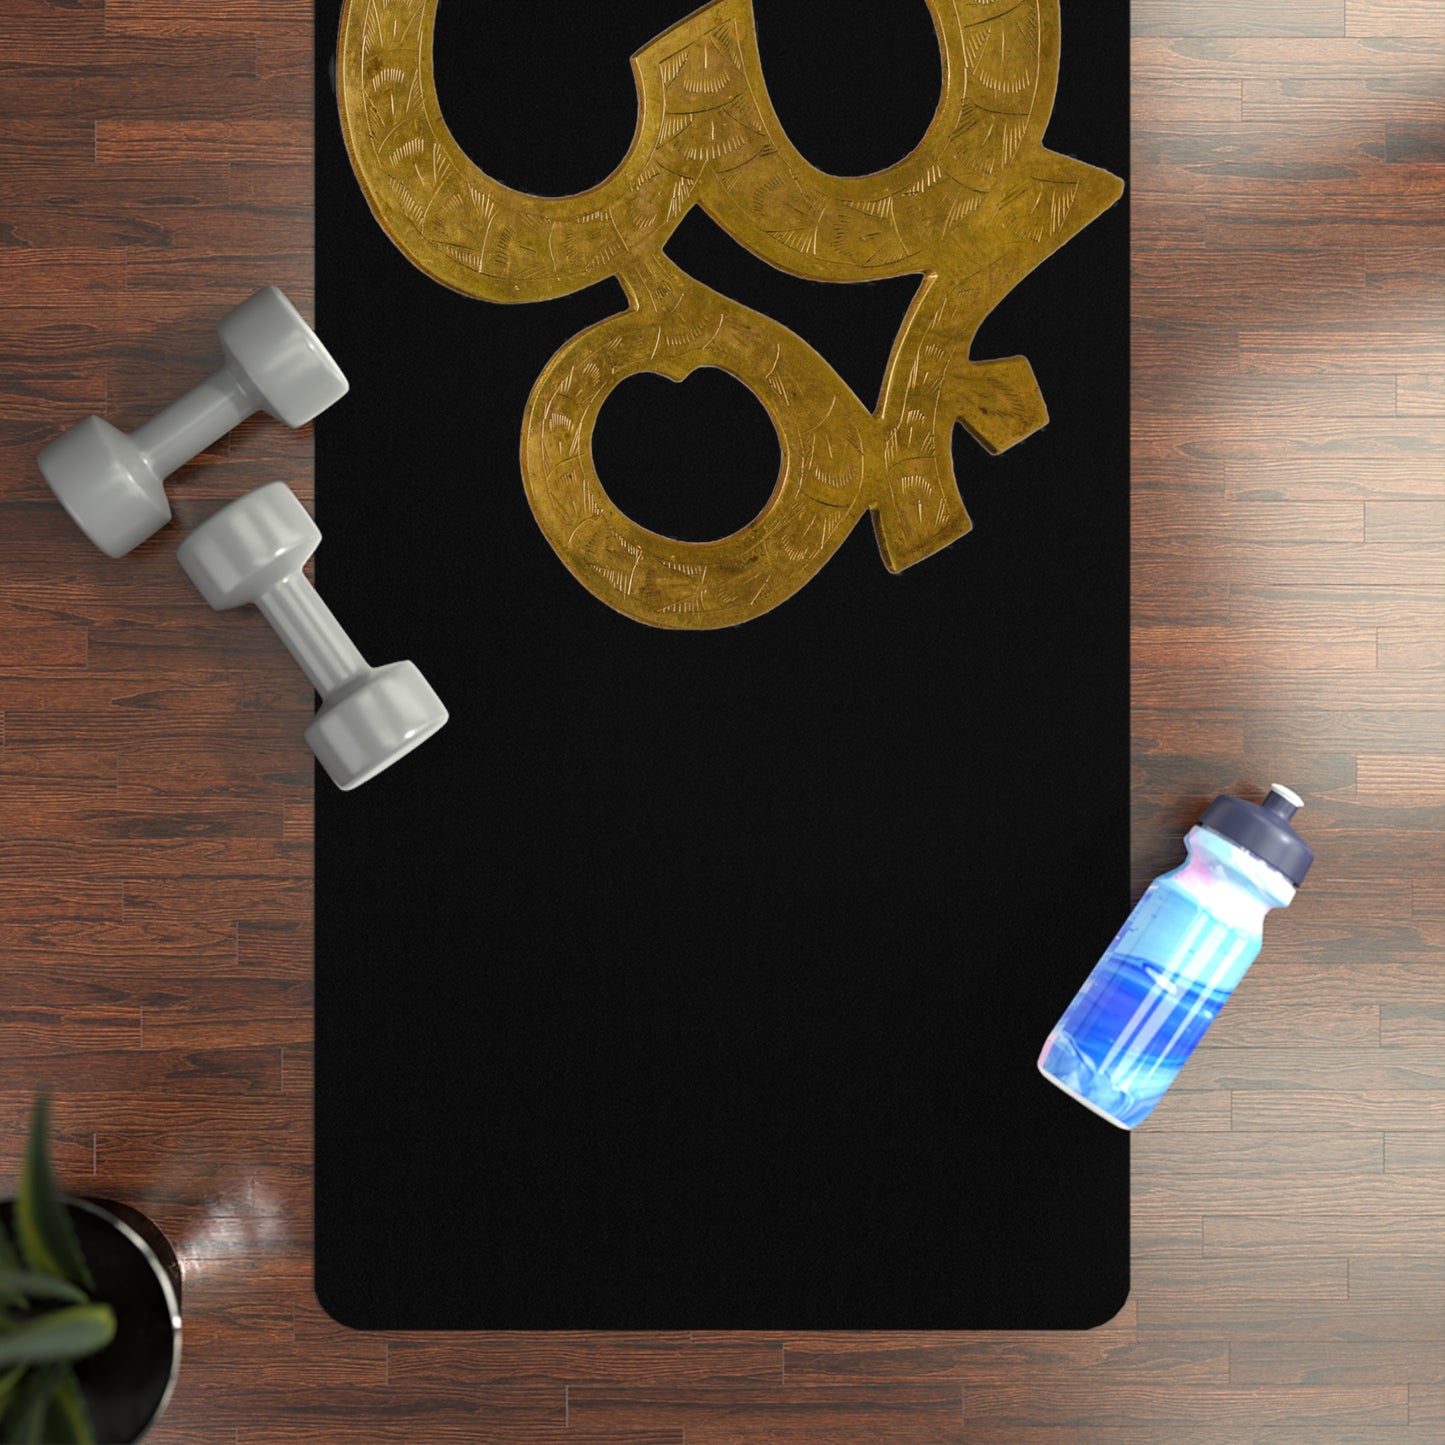 Elevate Your Practice Golden OHM Rubber Yoga Mat